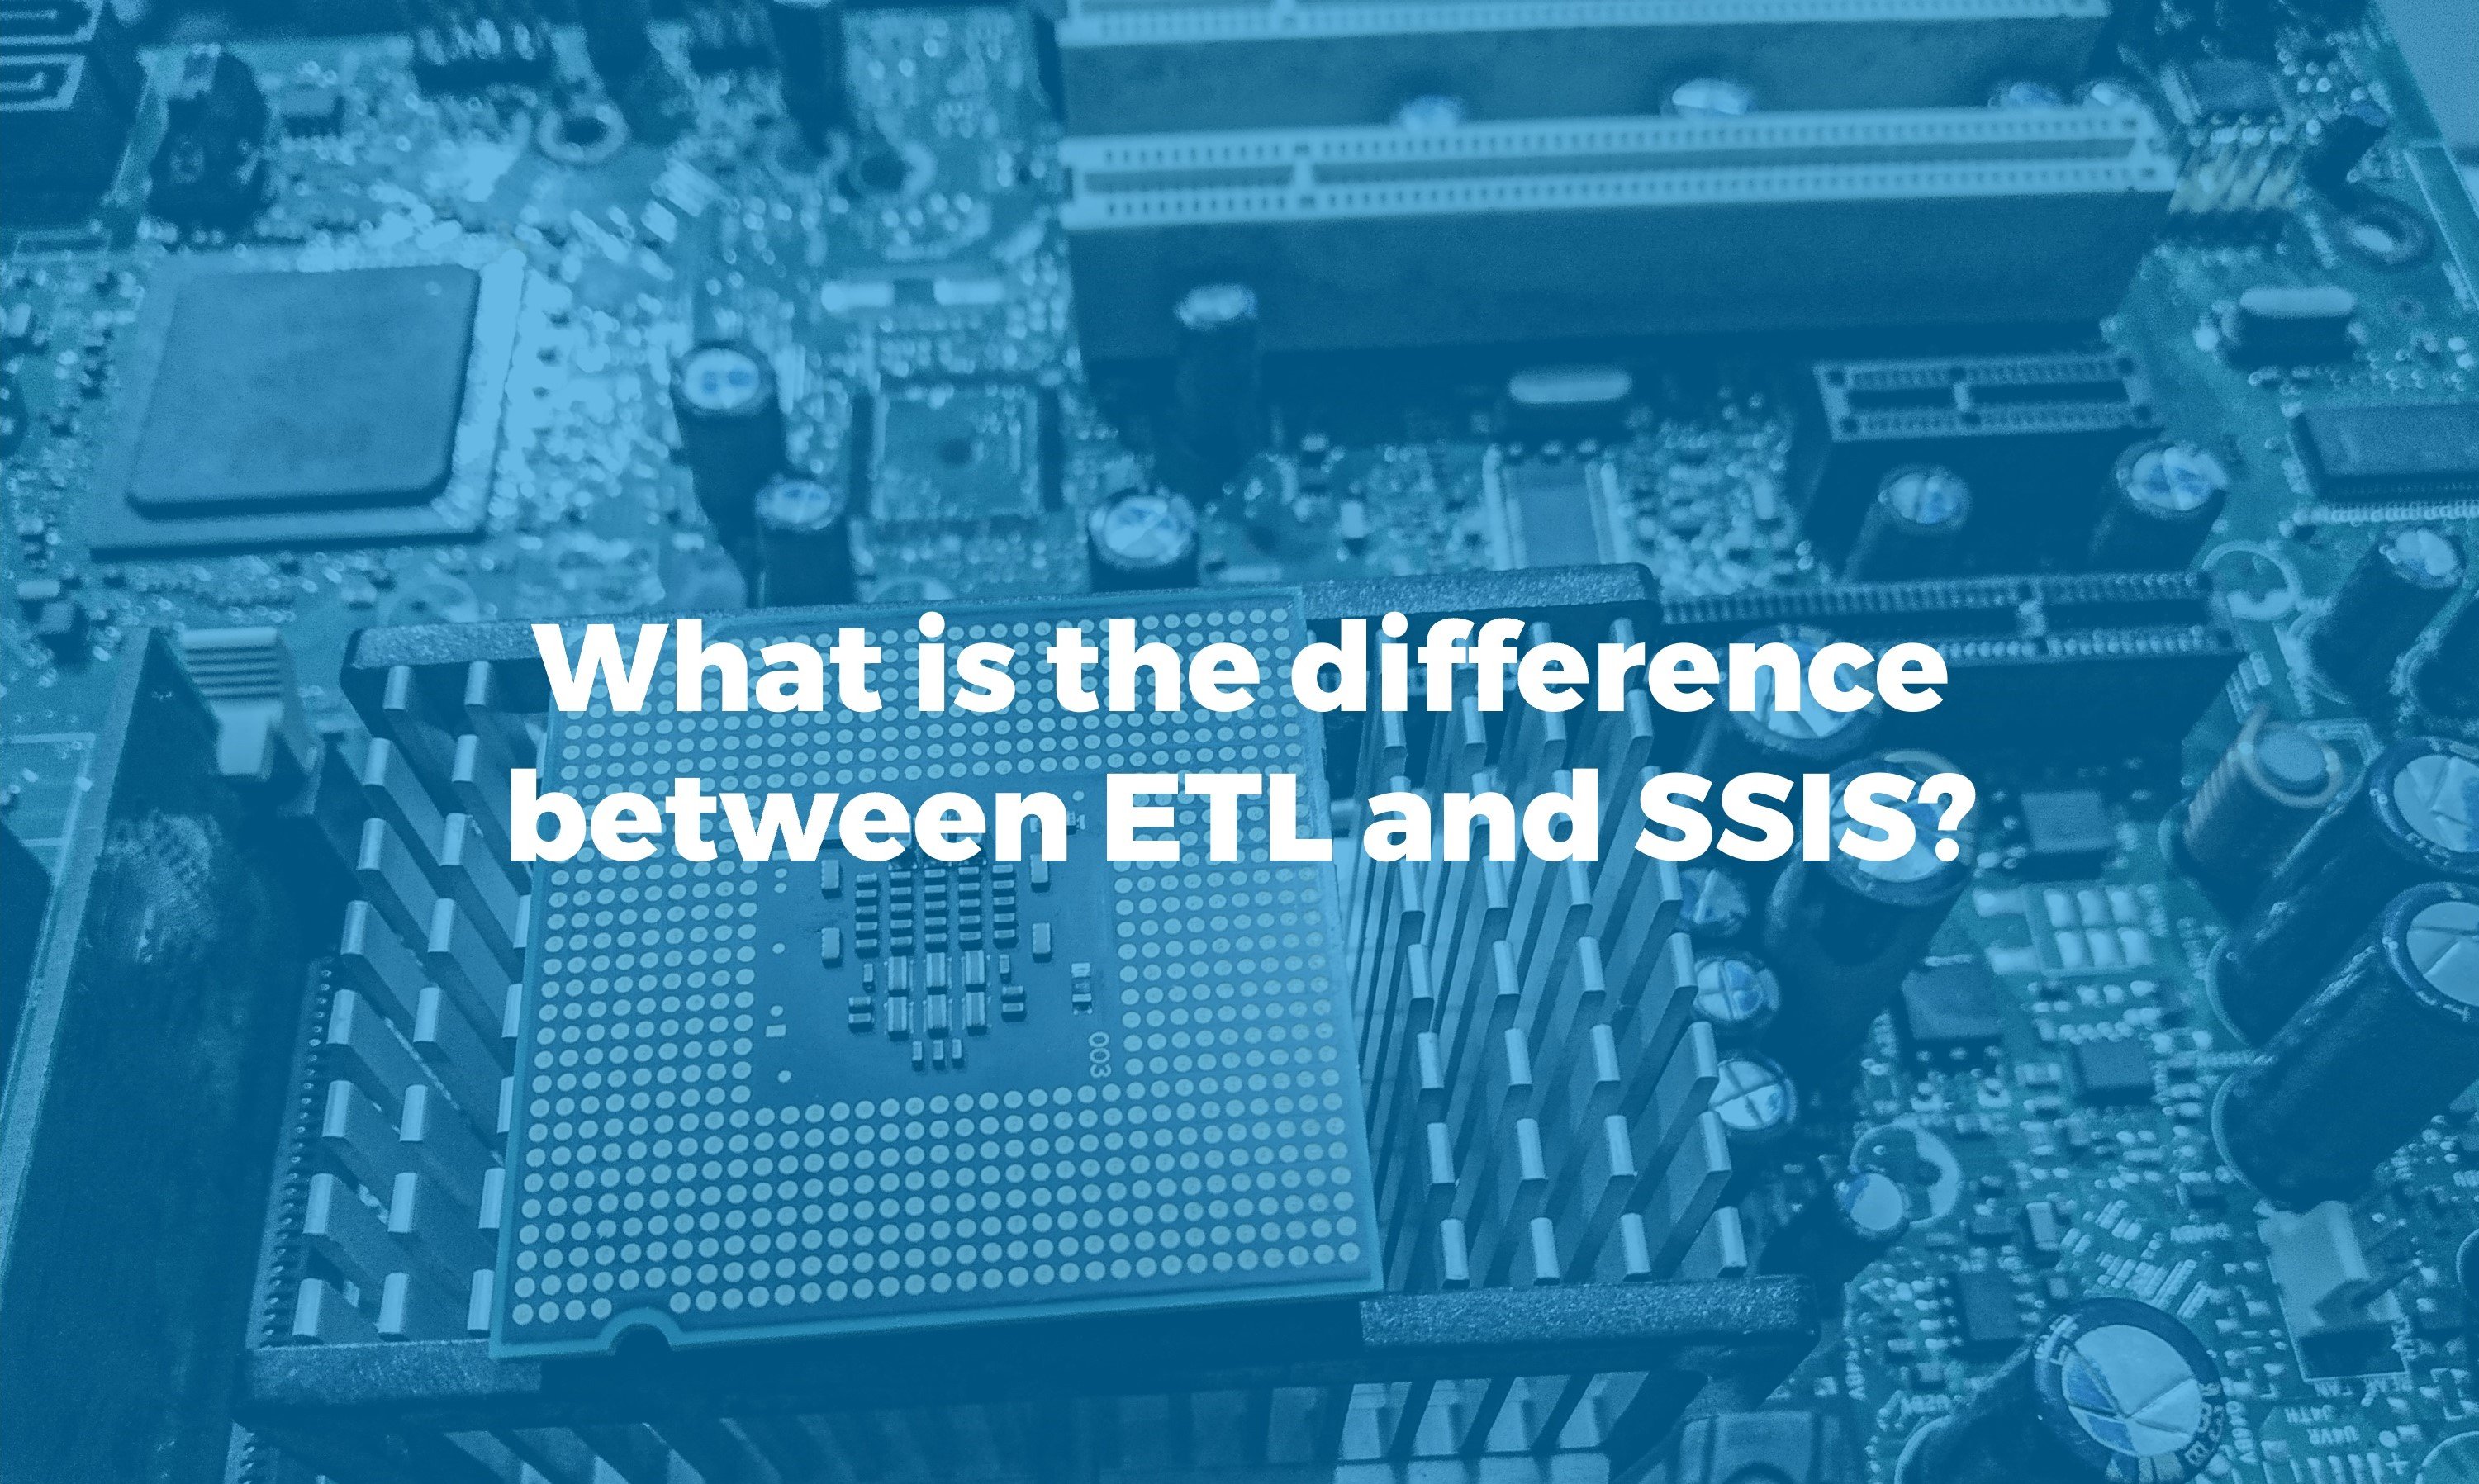 we talk about the difference between ETL and SSIS